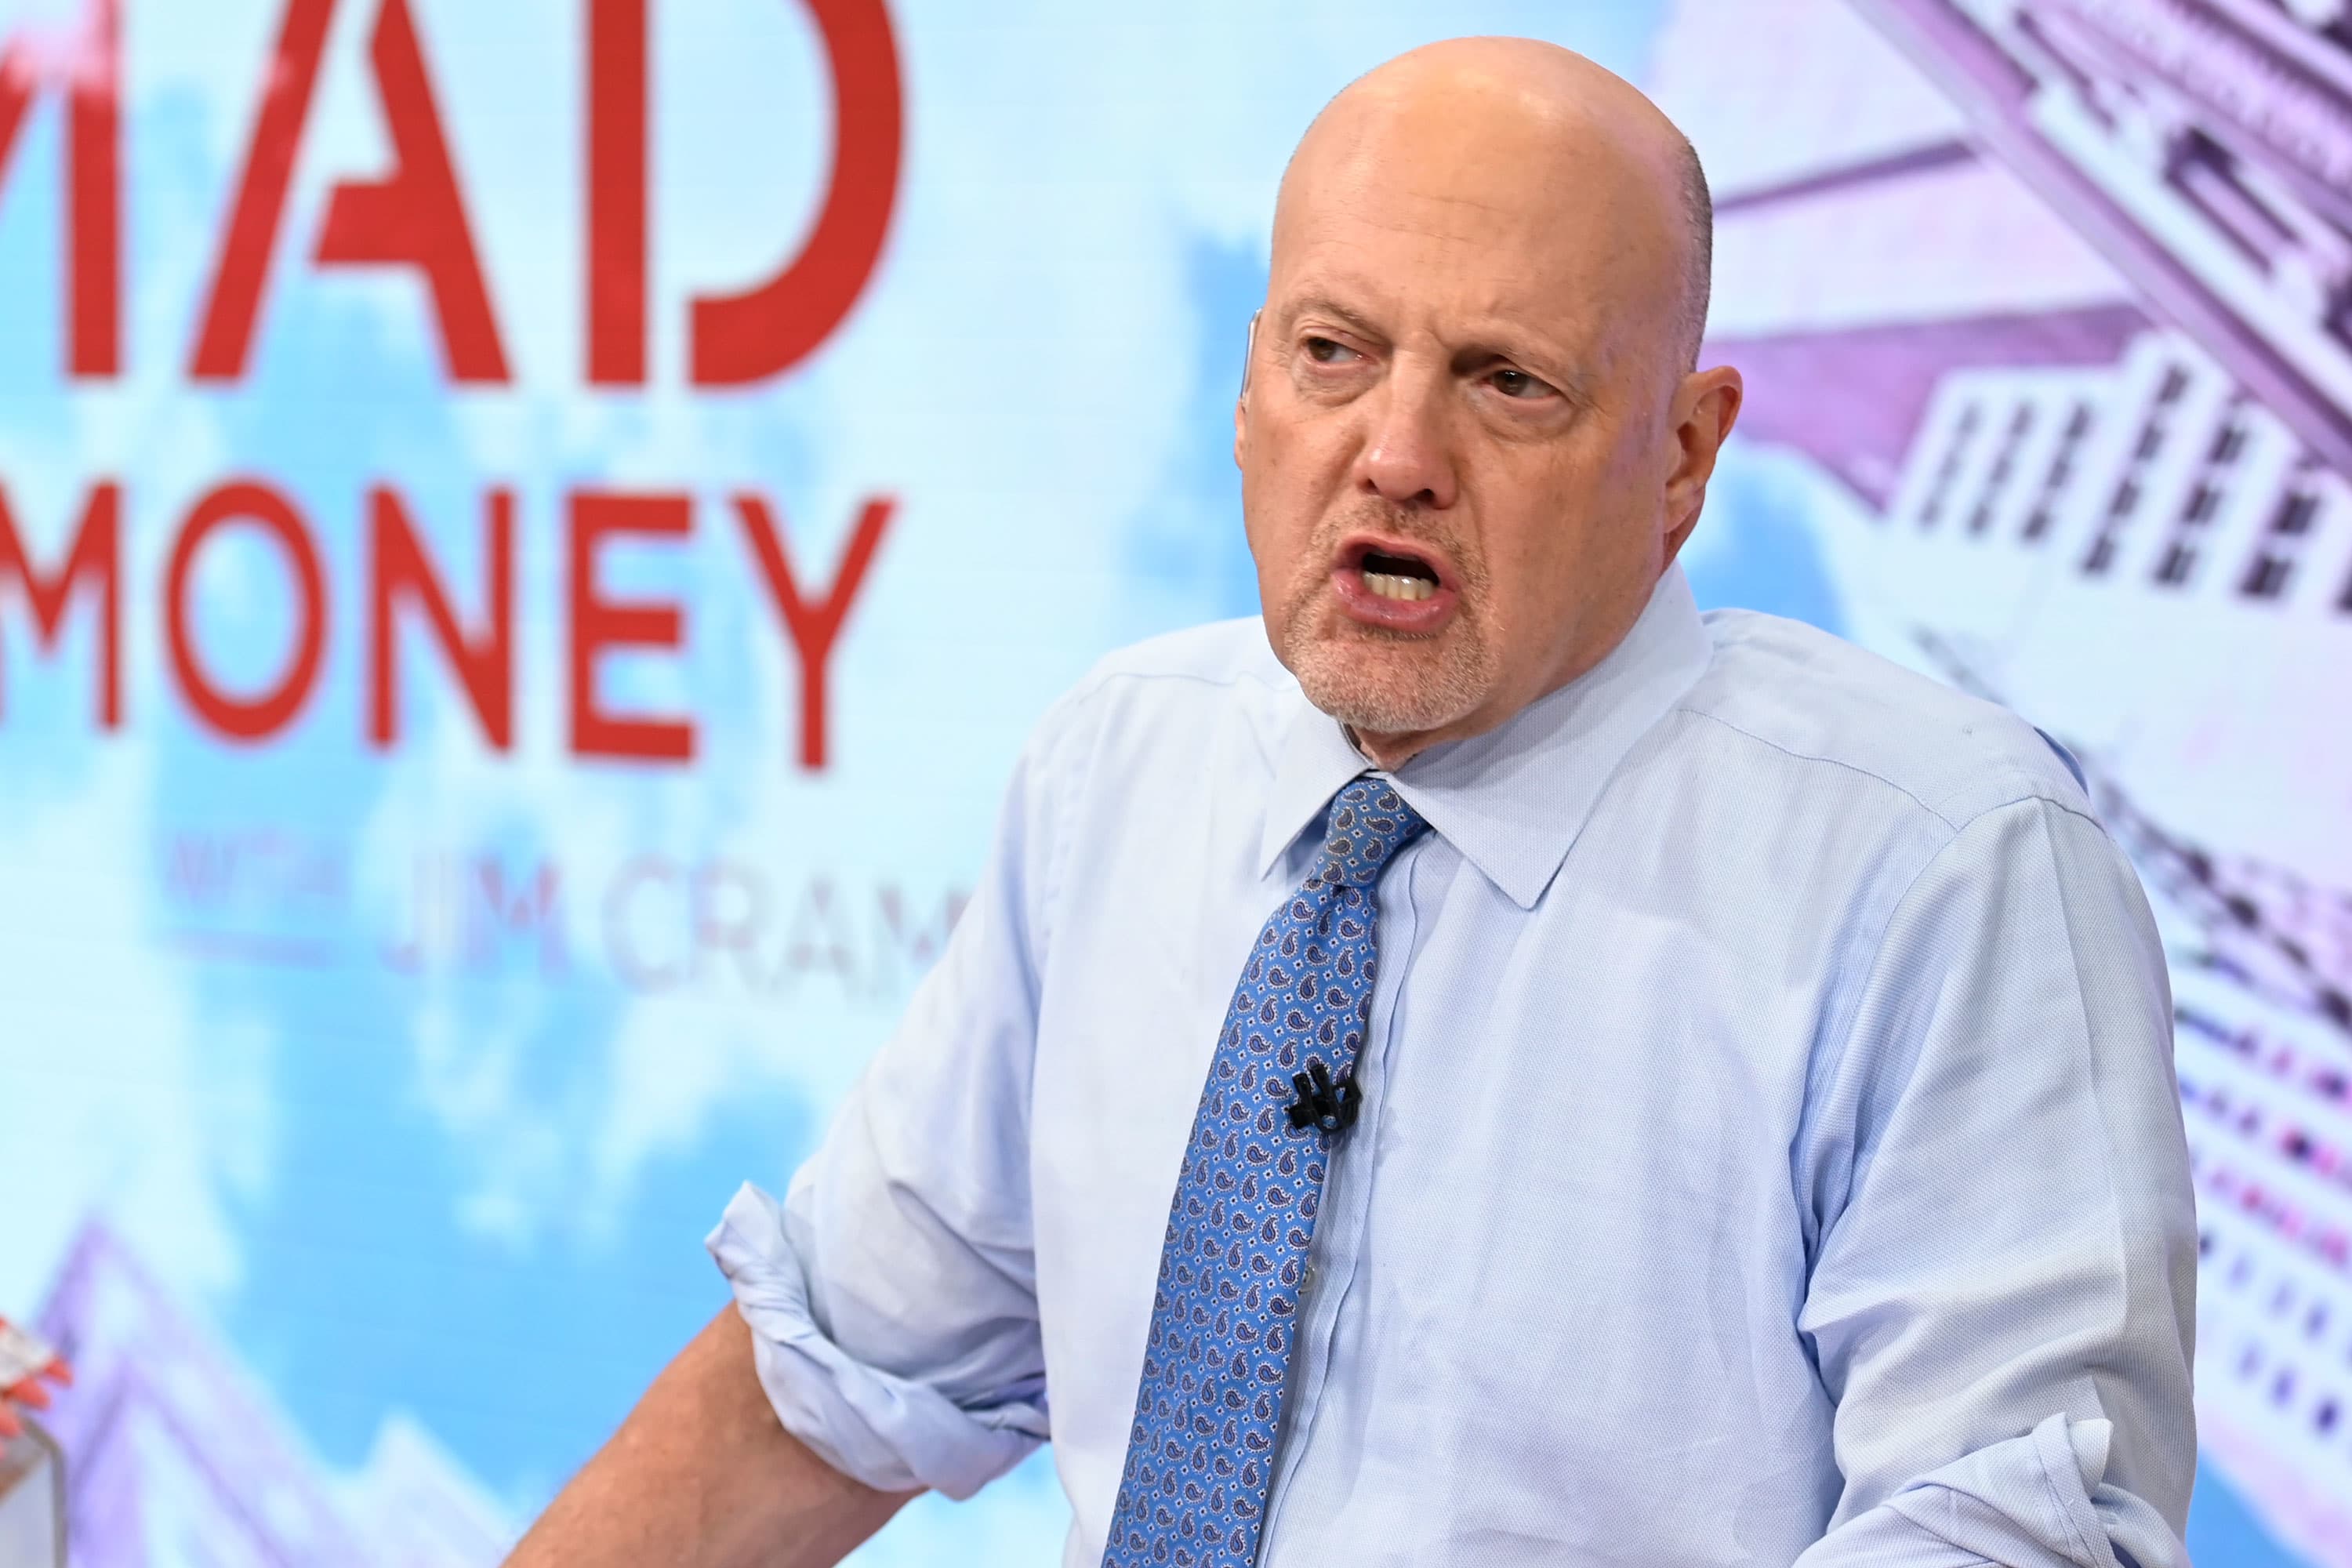 Jim Cramer says recent moves in Apple, Chipotle and Eli Lilly shares don’t make sense